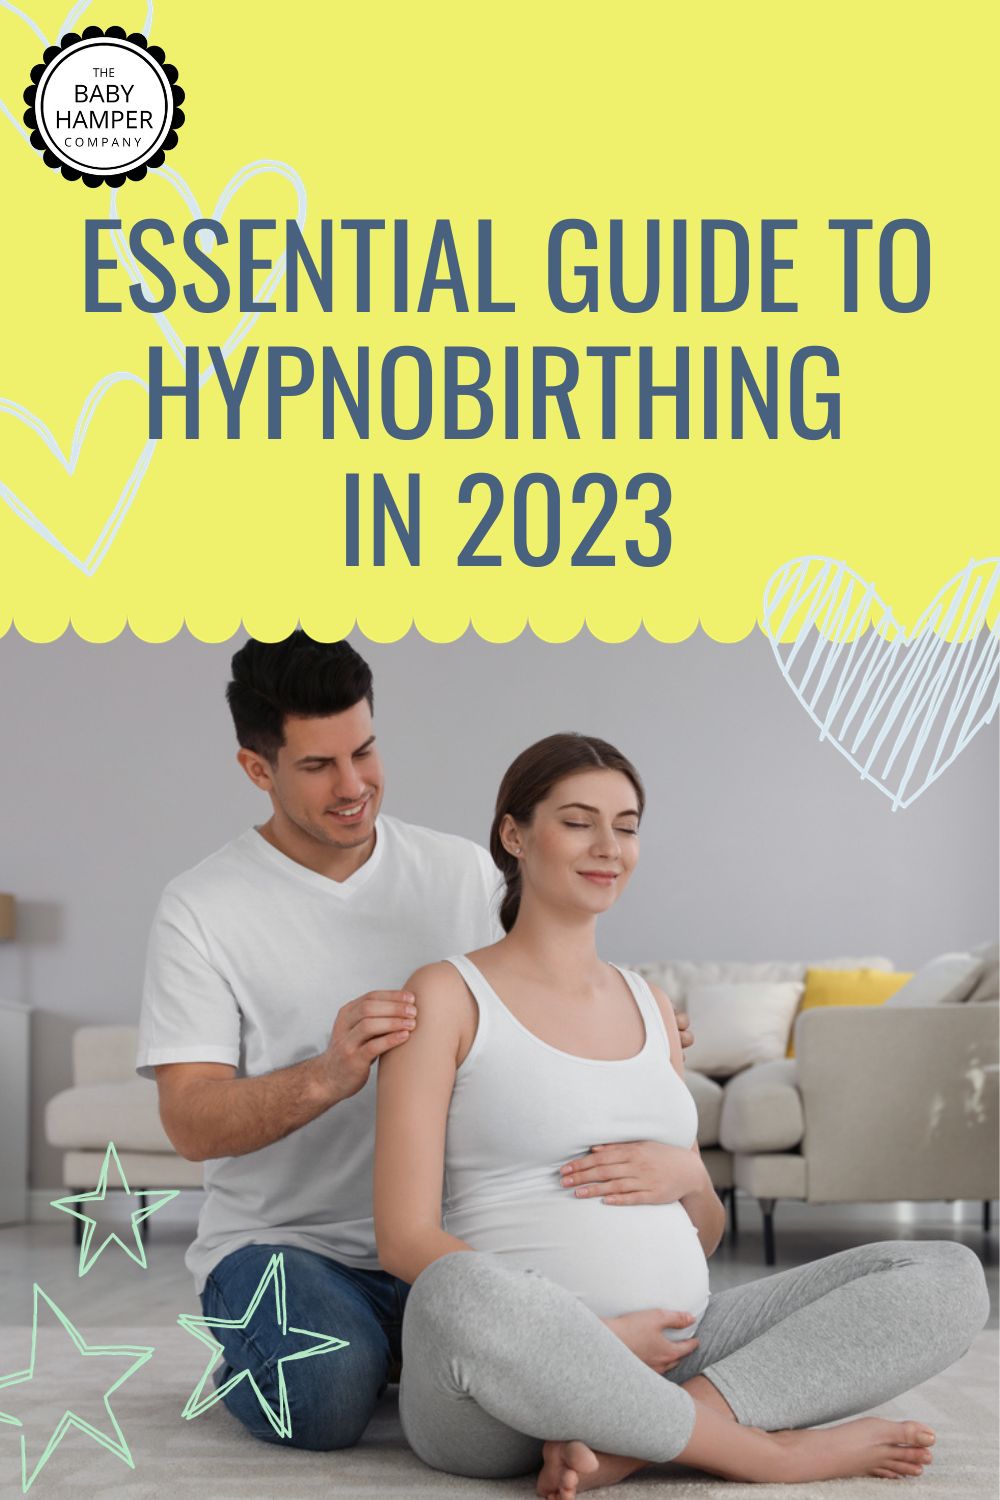 Essential Guide to Hypnobirthing in 2023